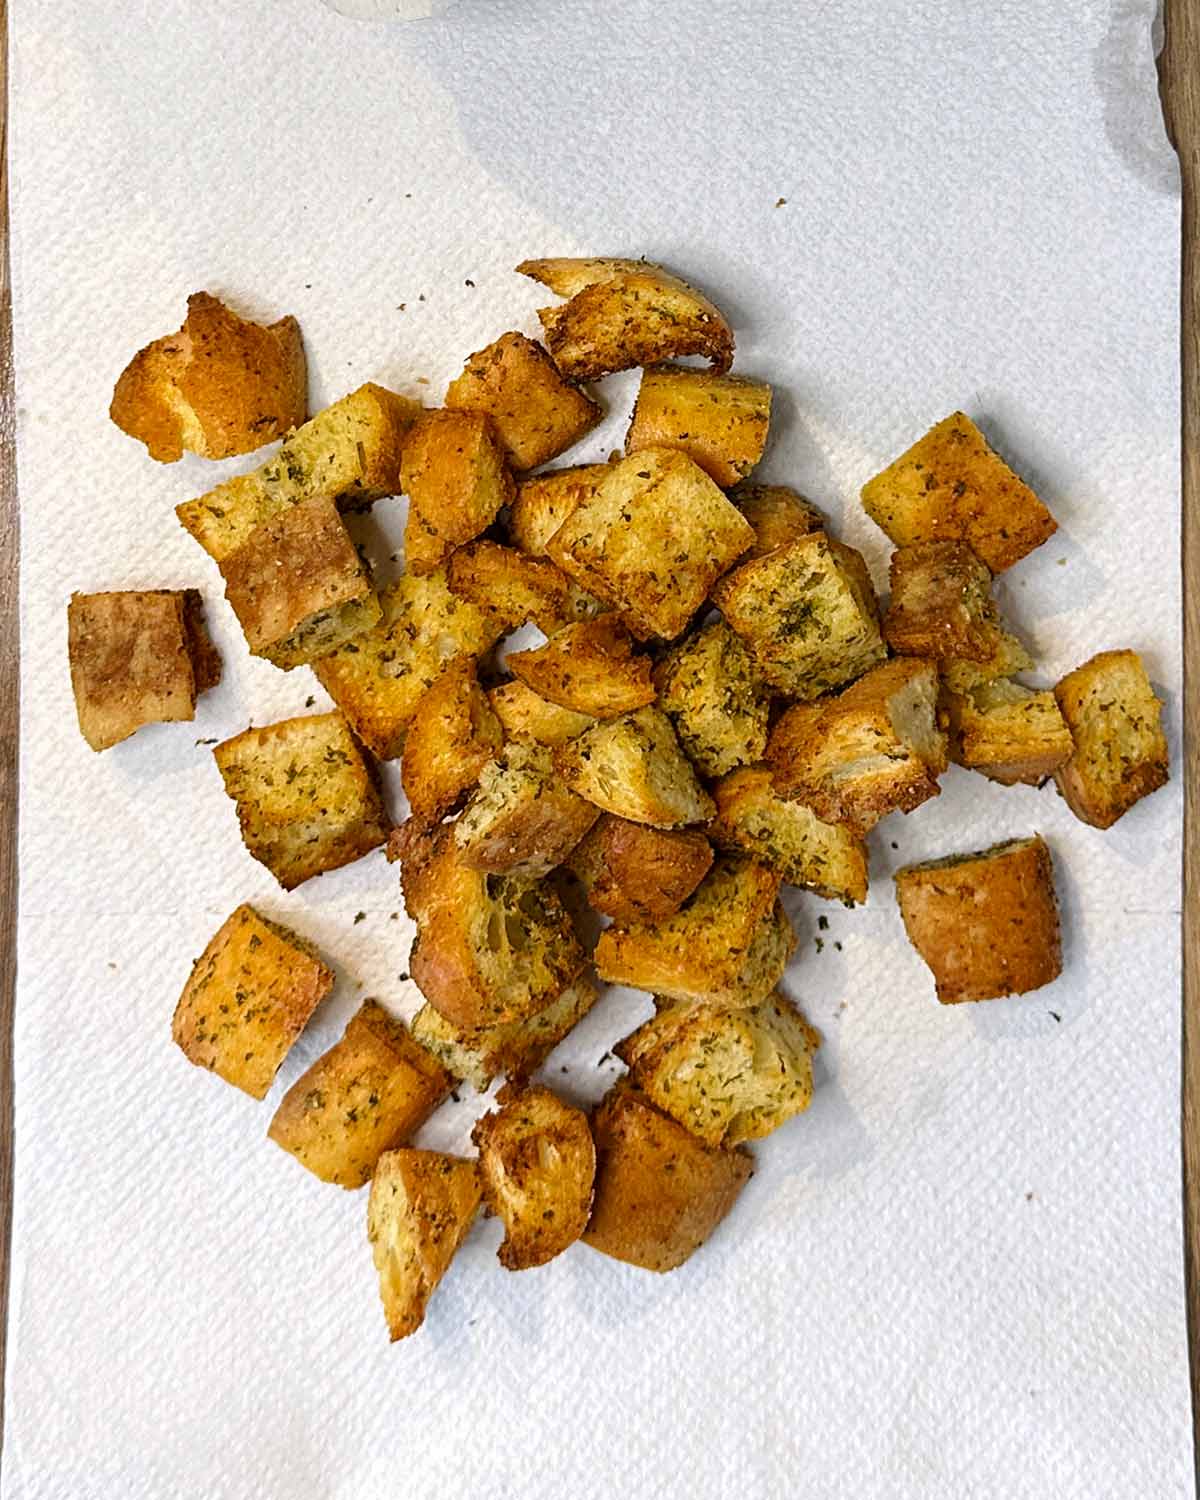 Croutons on a paper towel.